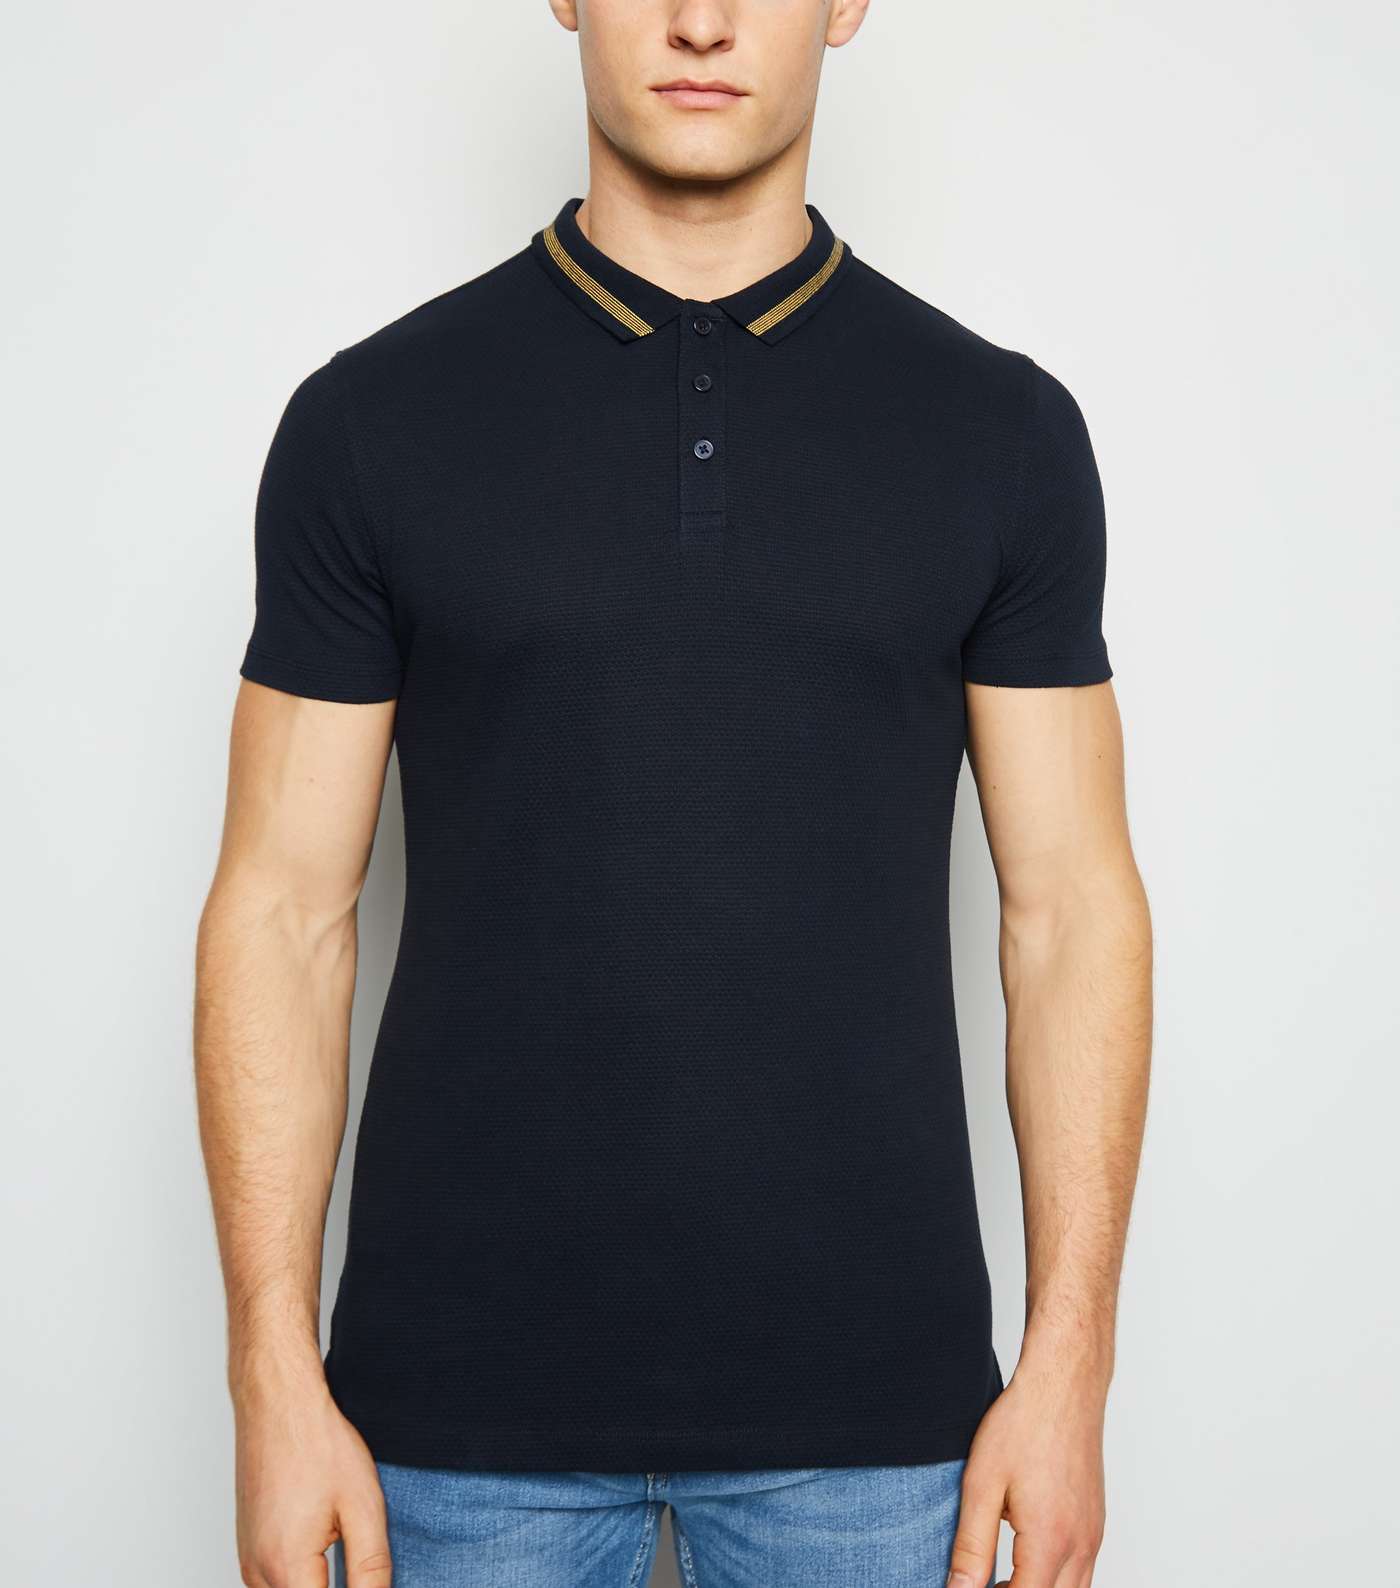 Navy Stripe Collar Muscle Fit Polo Shirt